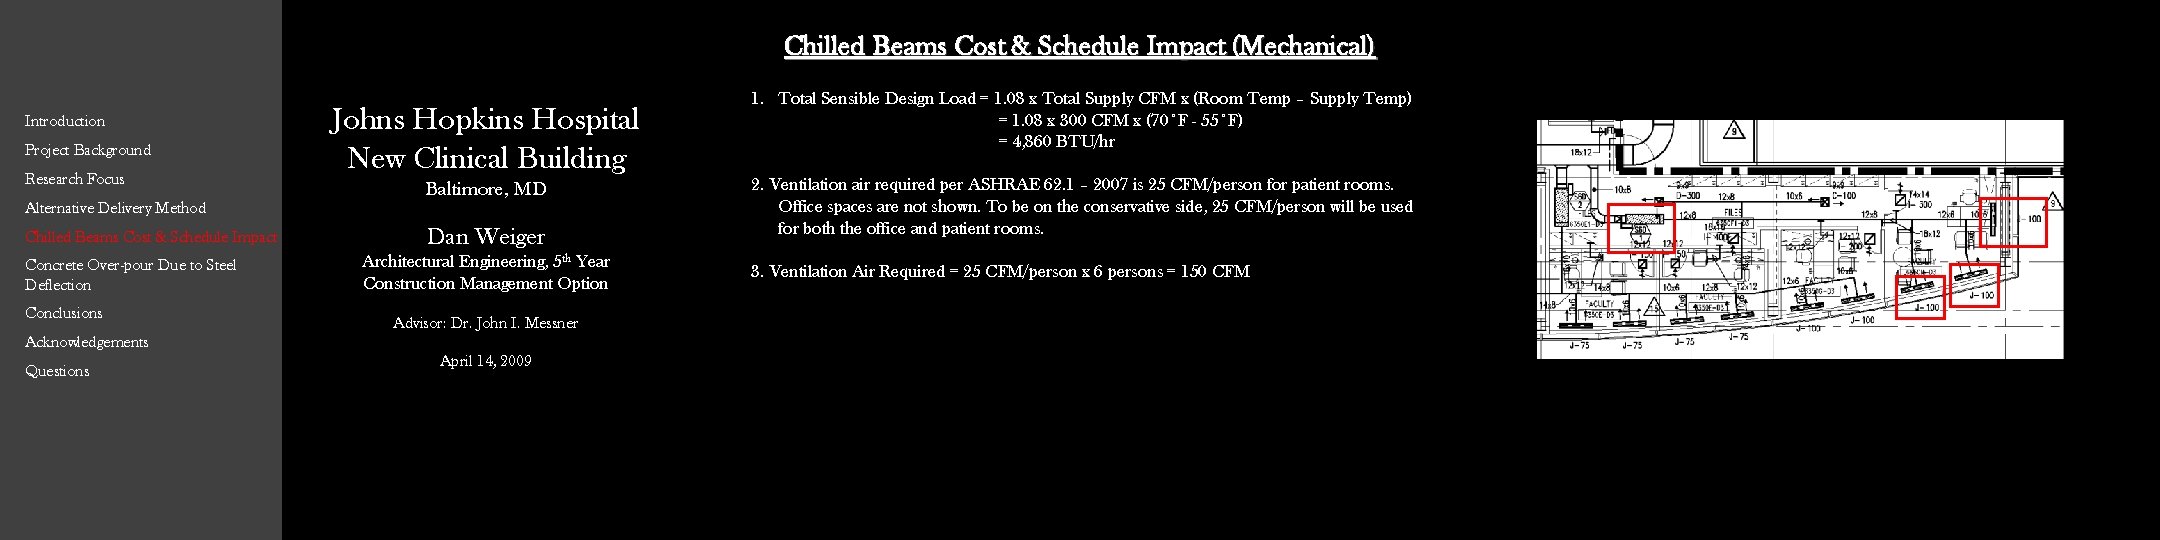 Chilled Beams Cost & Schedule Impact (Mechanical) Introduction Project Background Research Focus Alternative Delivery